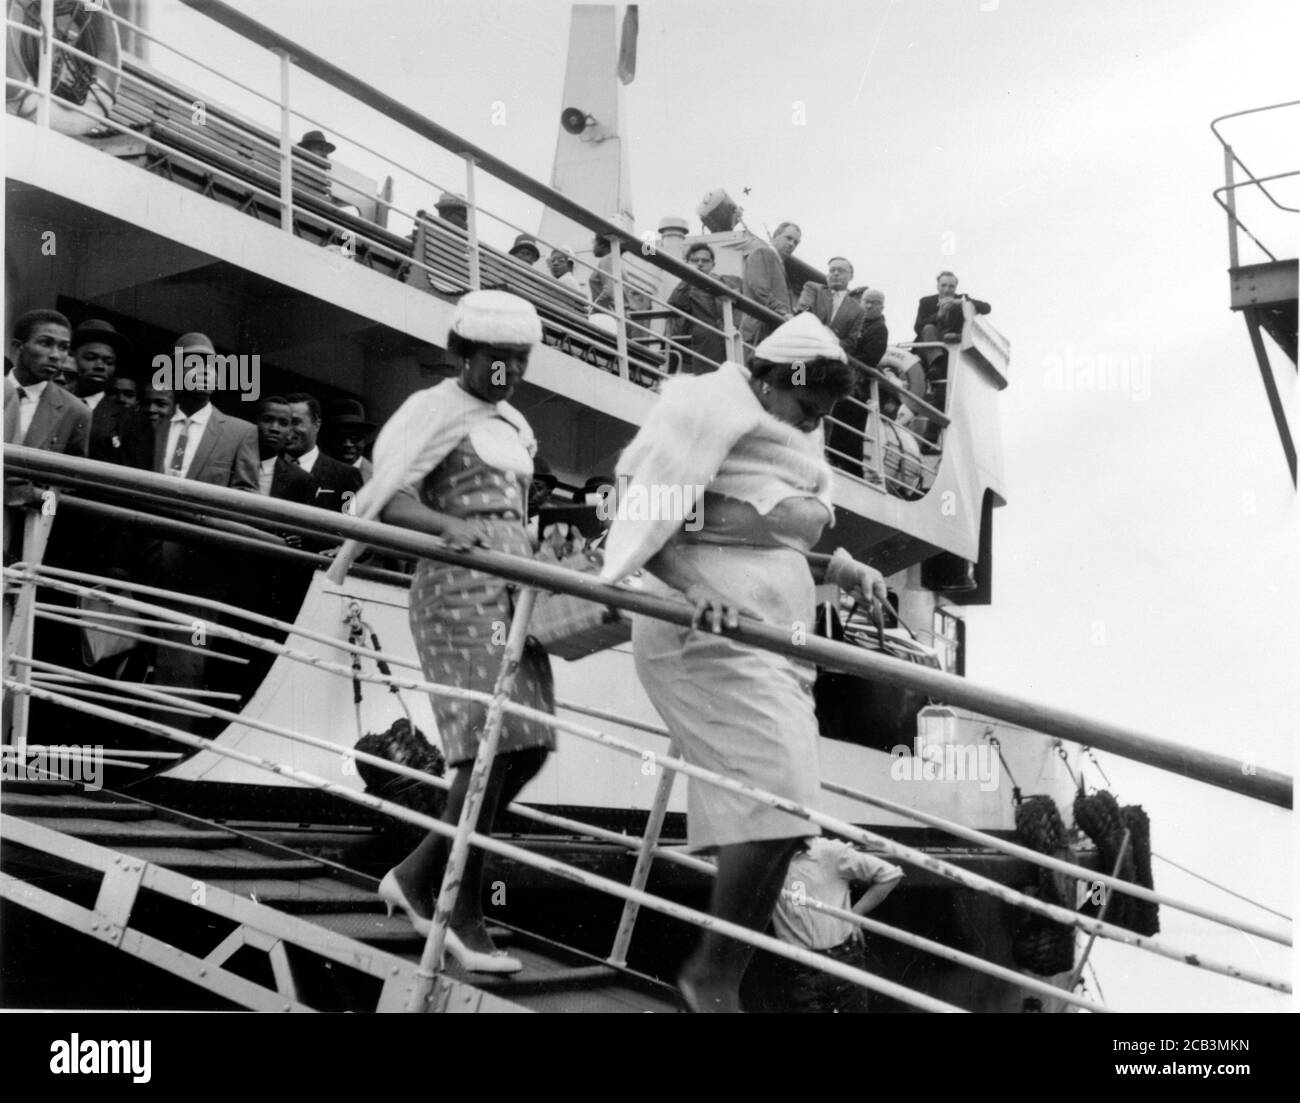 Men, women and children from the Caribbean arrive at Southampton in 1962 at the invitation of the British Government to help with rebuilding Britain after World War II. These people became the Windrush Generation due to their treatment by the British Home Office under a hostile environment policy where employers and other organisations were required to ask for visas. Stock Photo